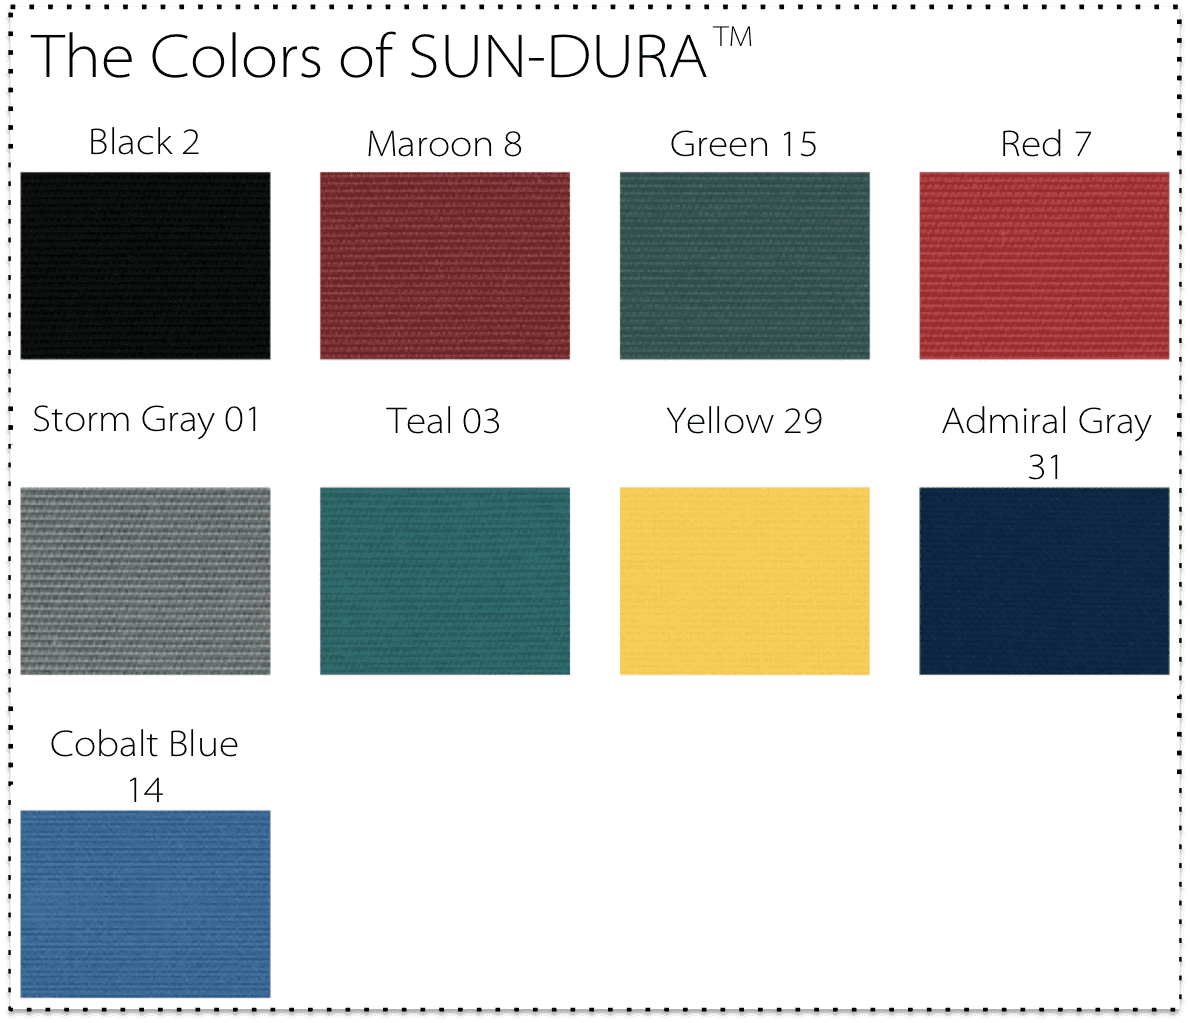 Sun-DURA swatches shown in all the available colors